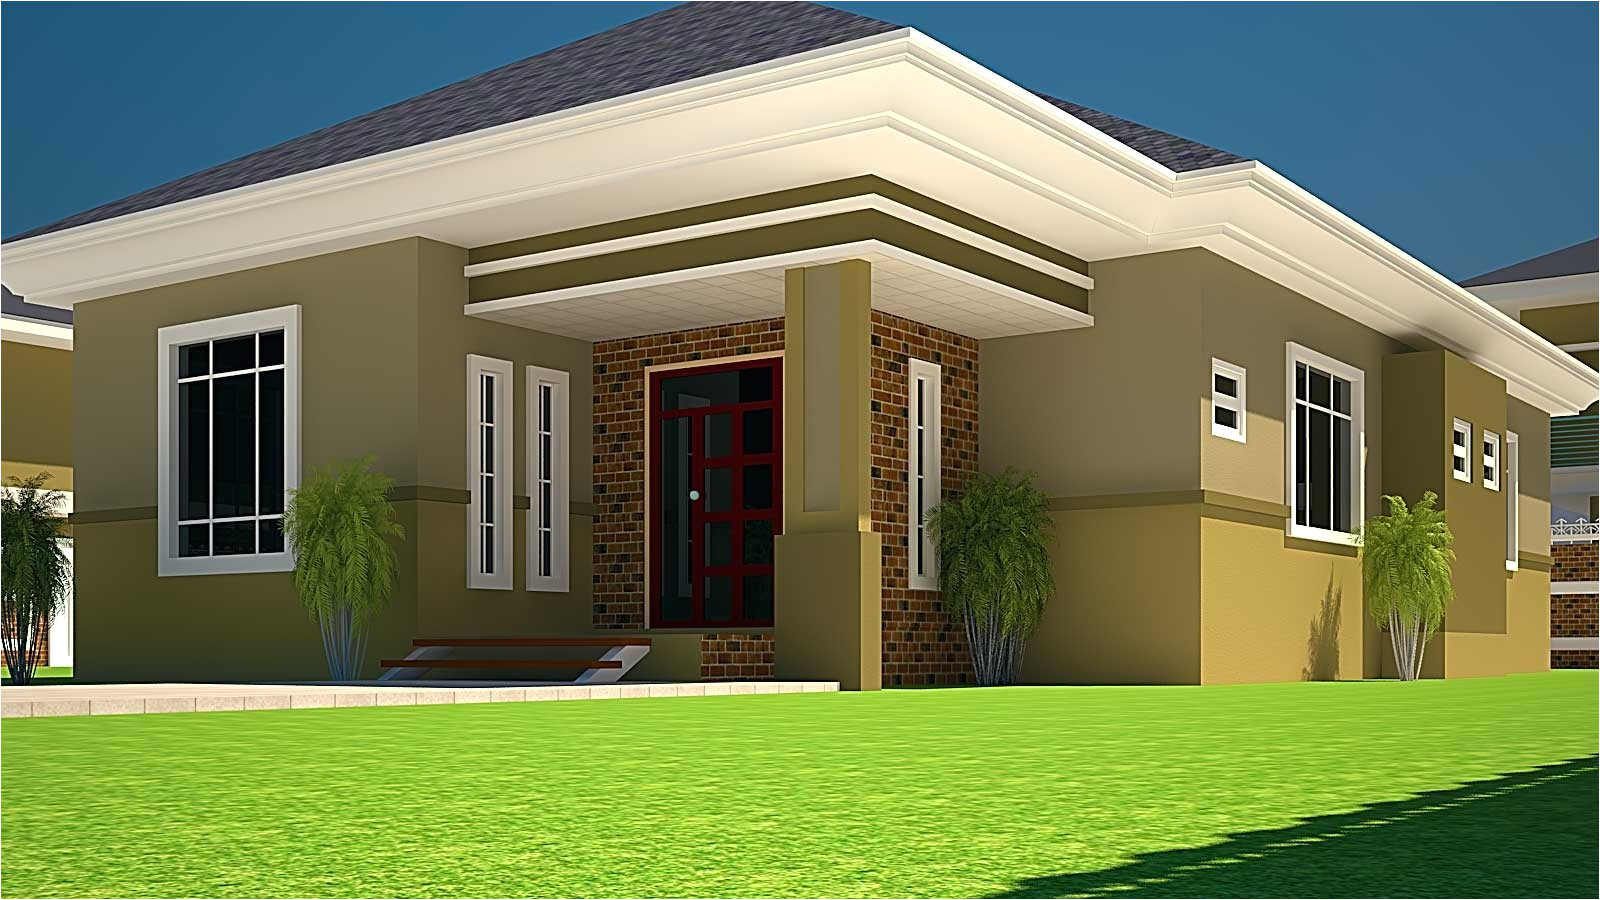 3 bedroom house designs and floor plans